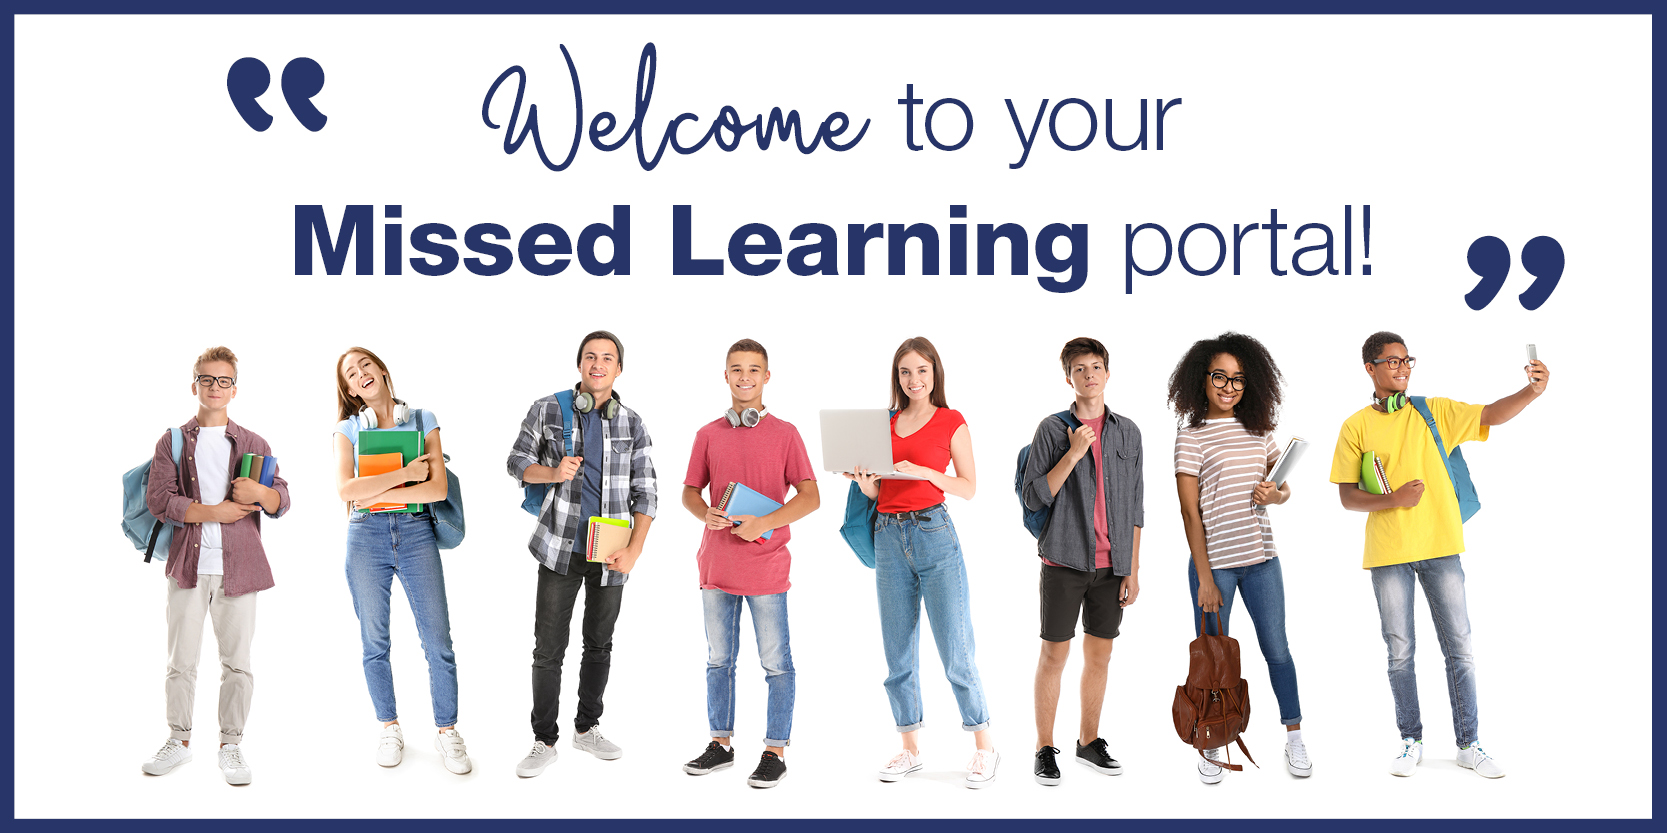 Welcome to your missed learning portal!